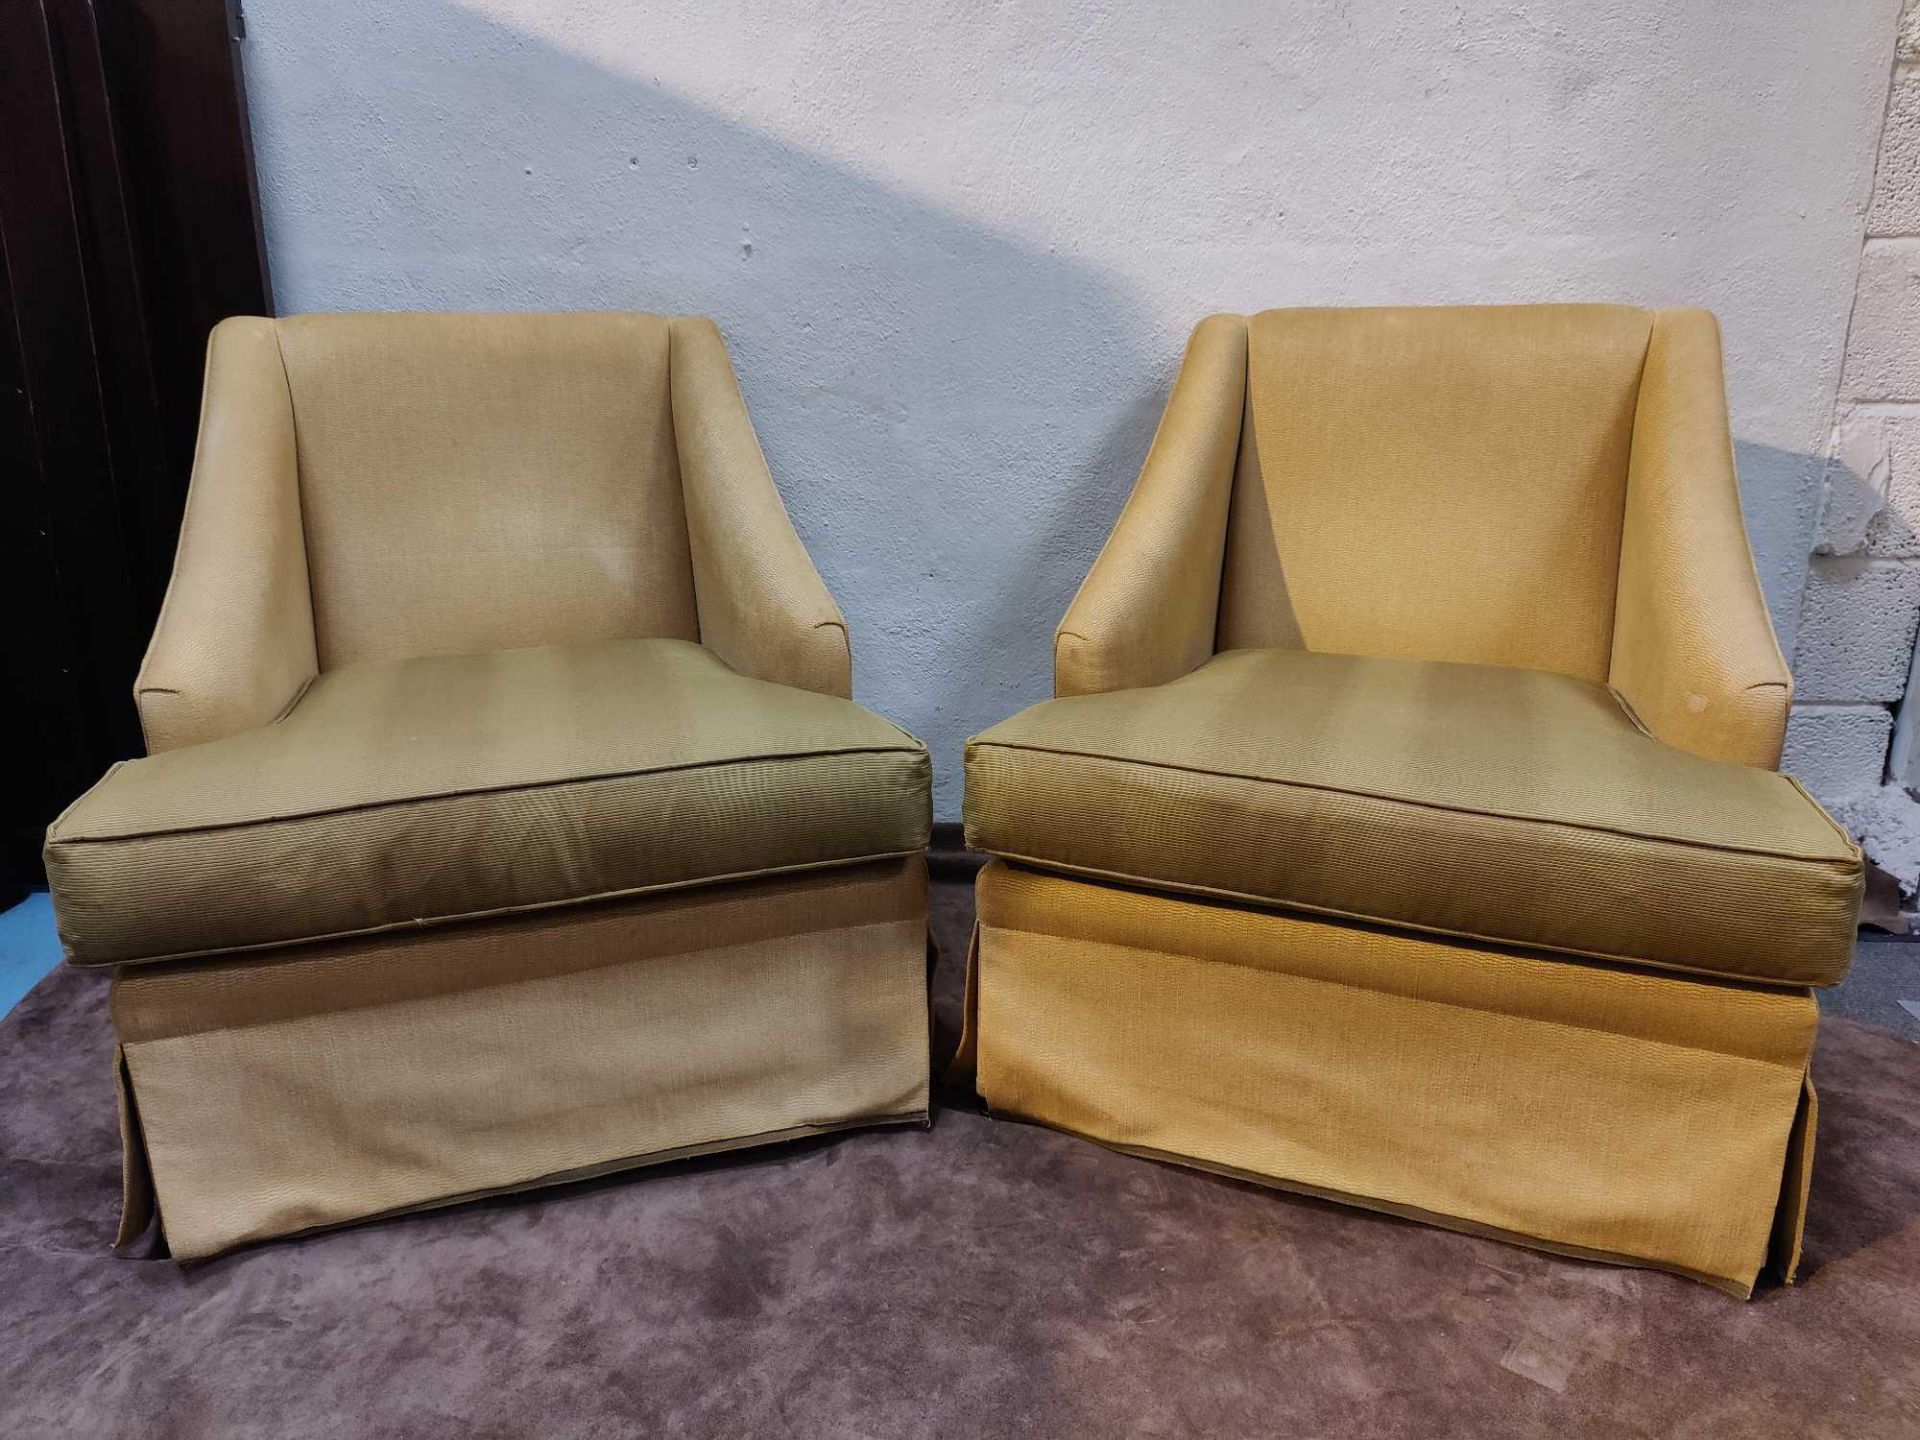 A Pair Of Dudgeon British Handmade Furniture London Egerton Armchair Sloping Arms Upholstered In